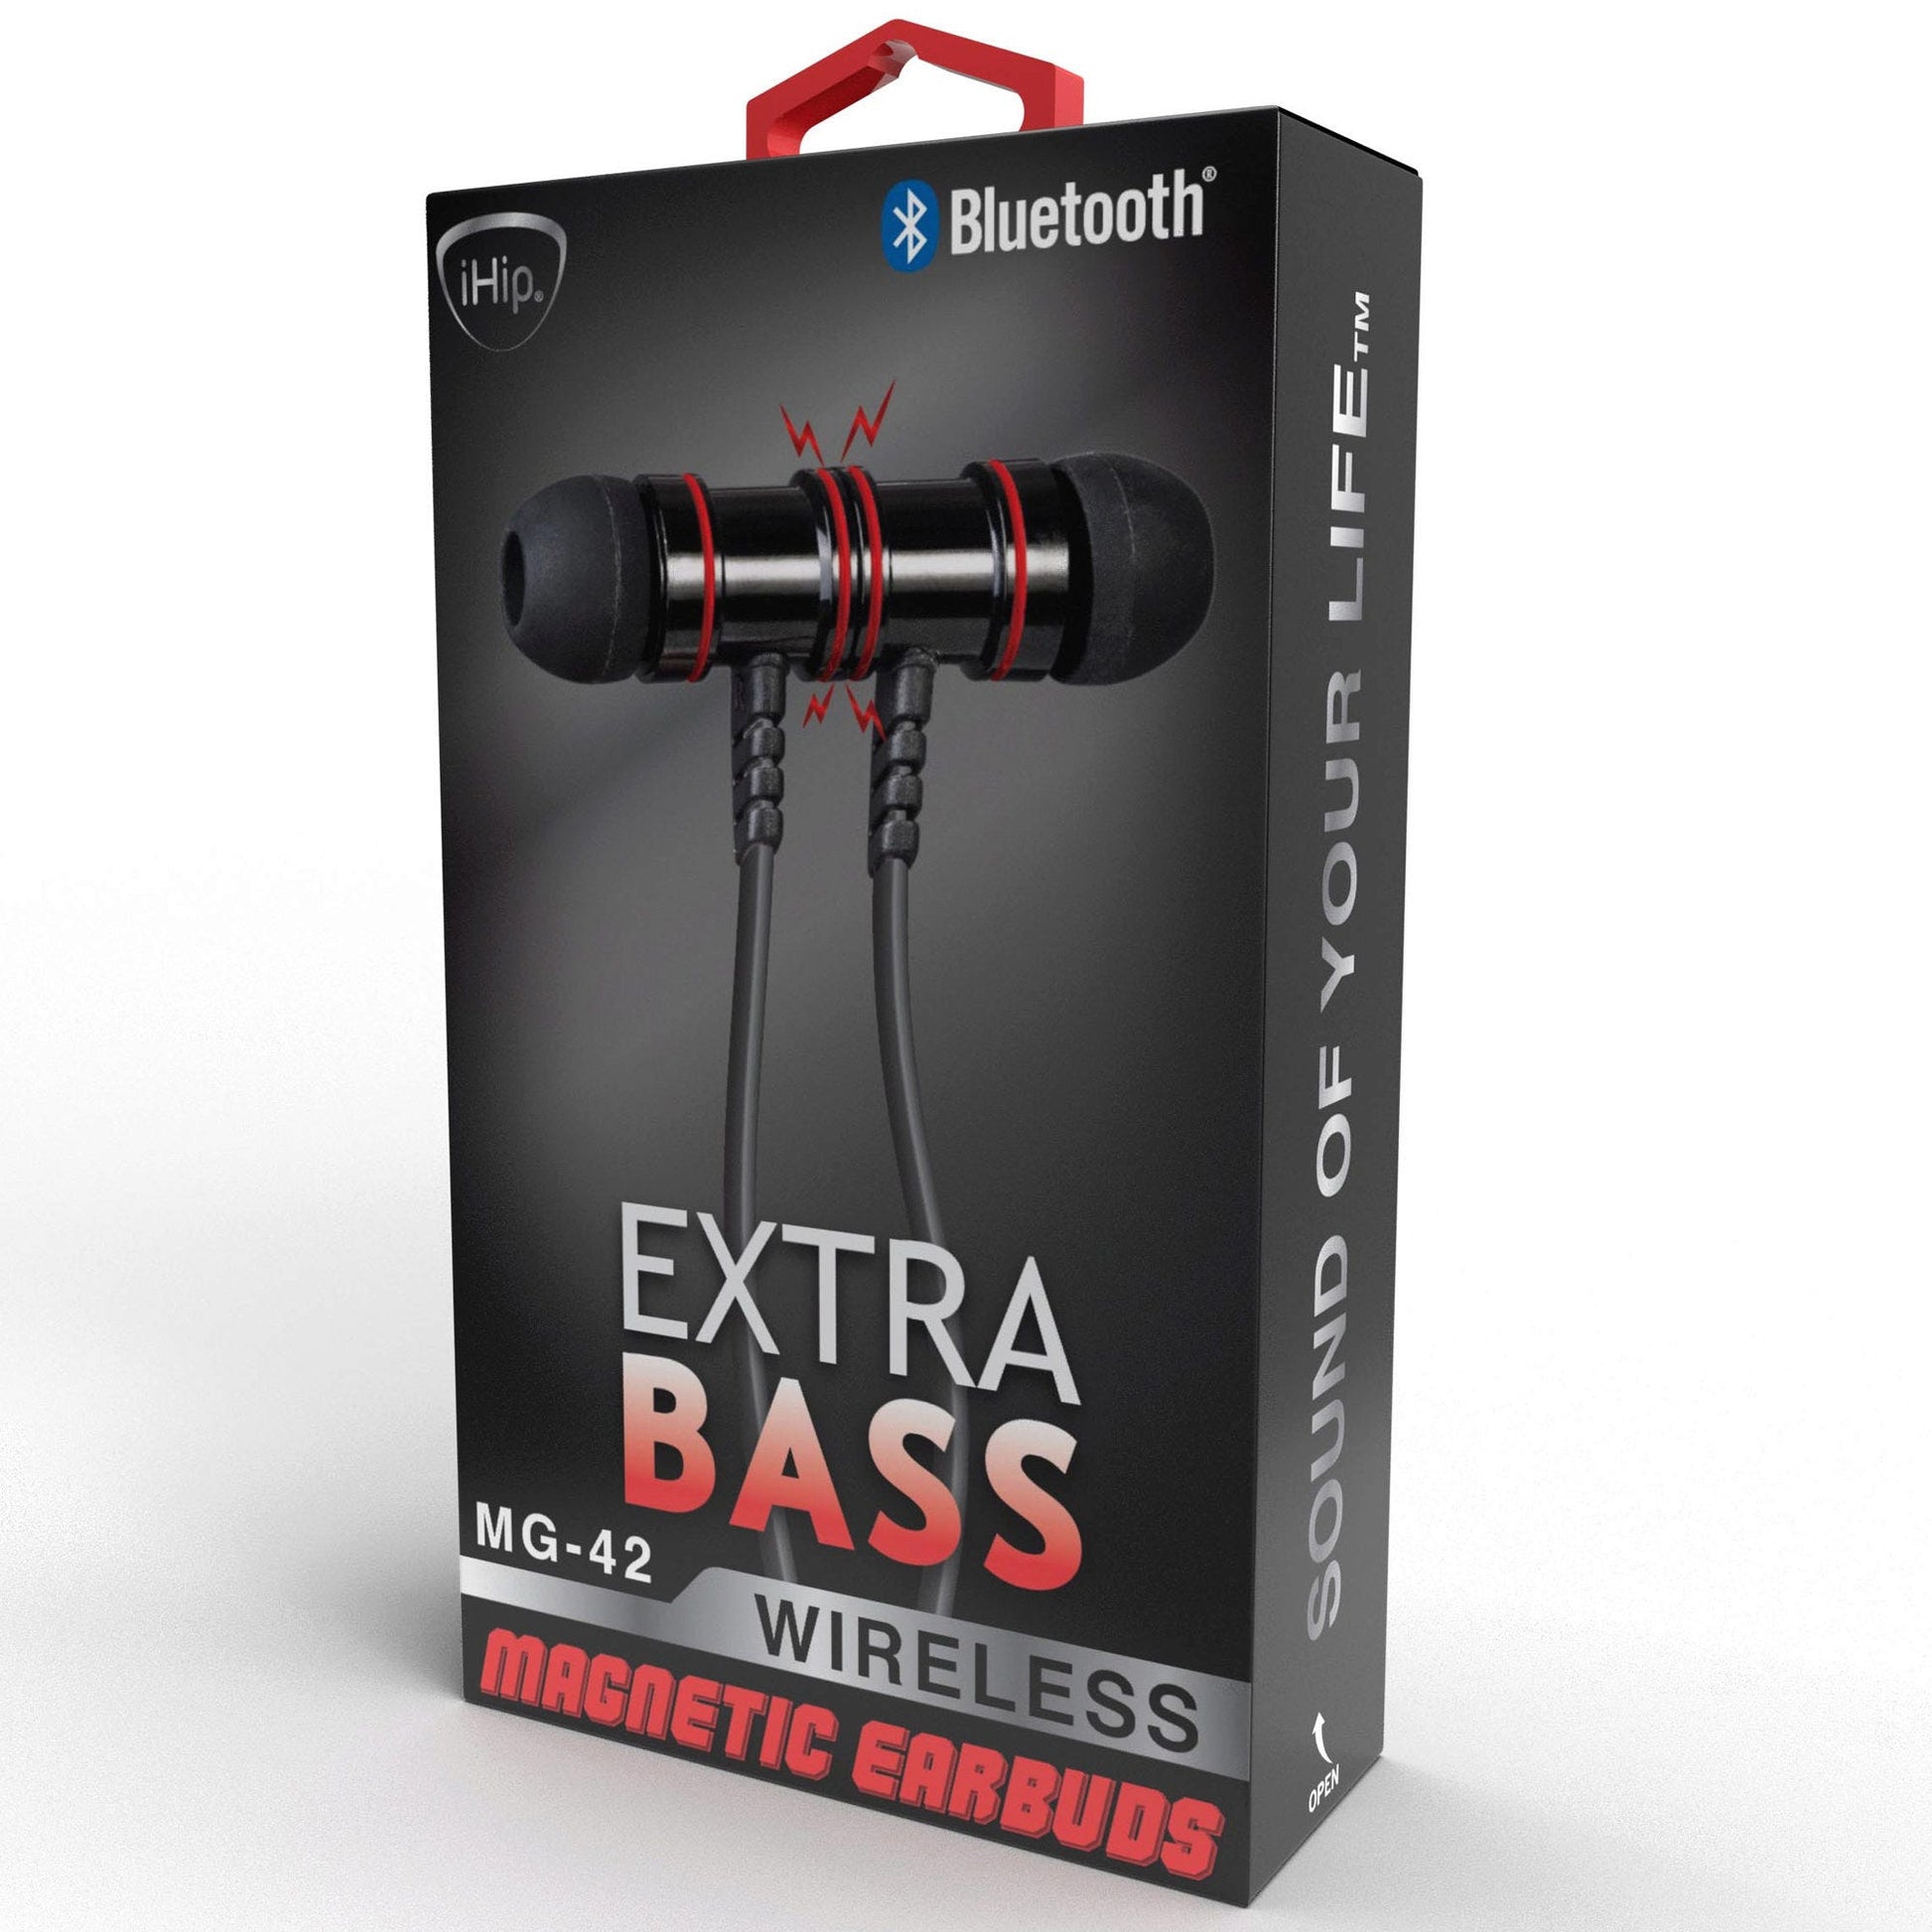 i hip extra bass wireless magnetic bluetooth earbuds -- 6 per box